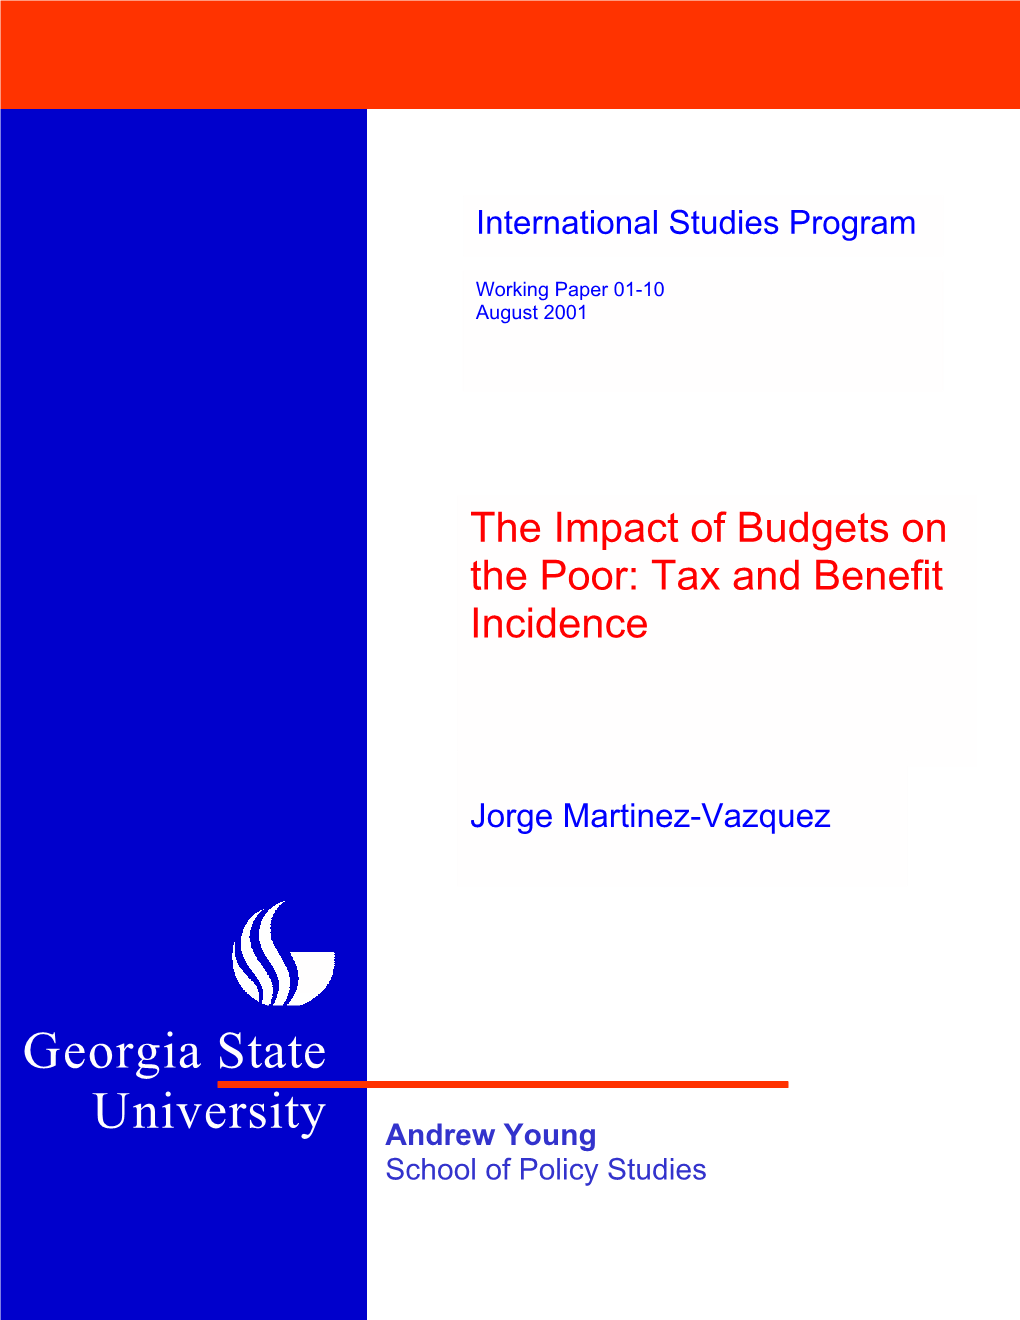 Tax and Benefit Incidence